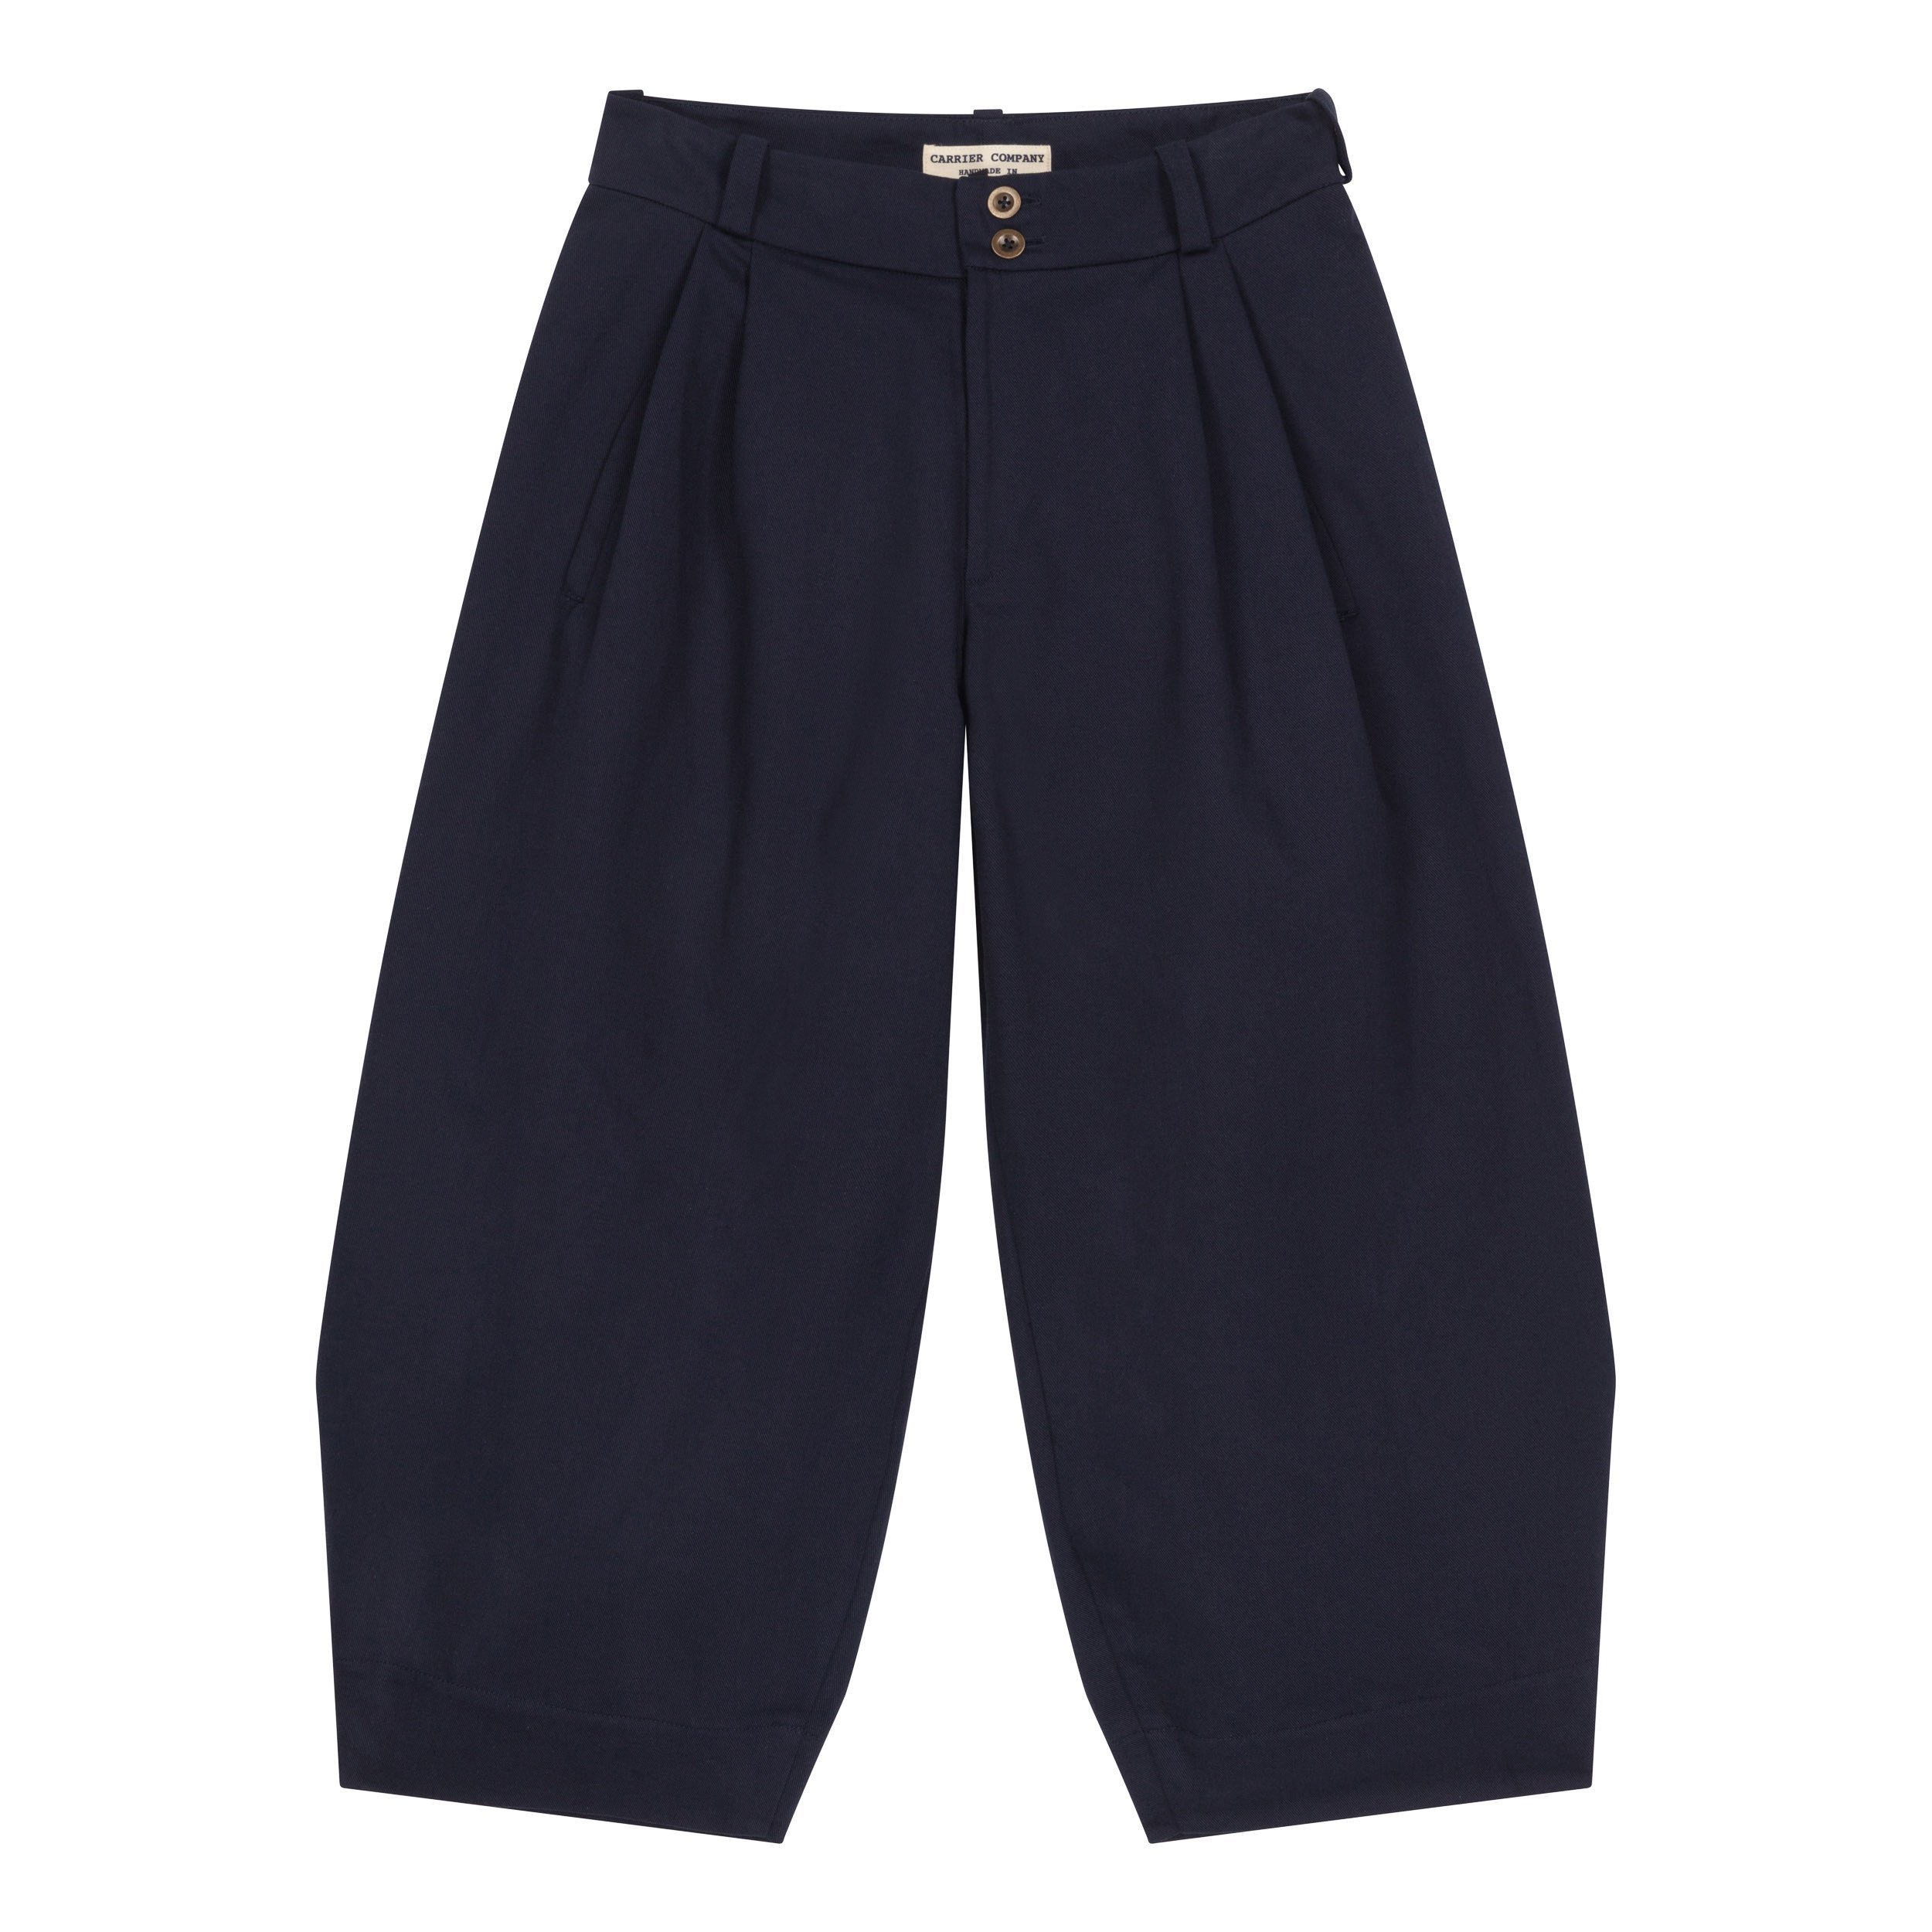 Carrier Company Dutch trouser In Navy Cotton Drill